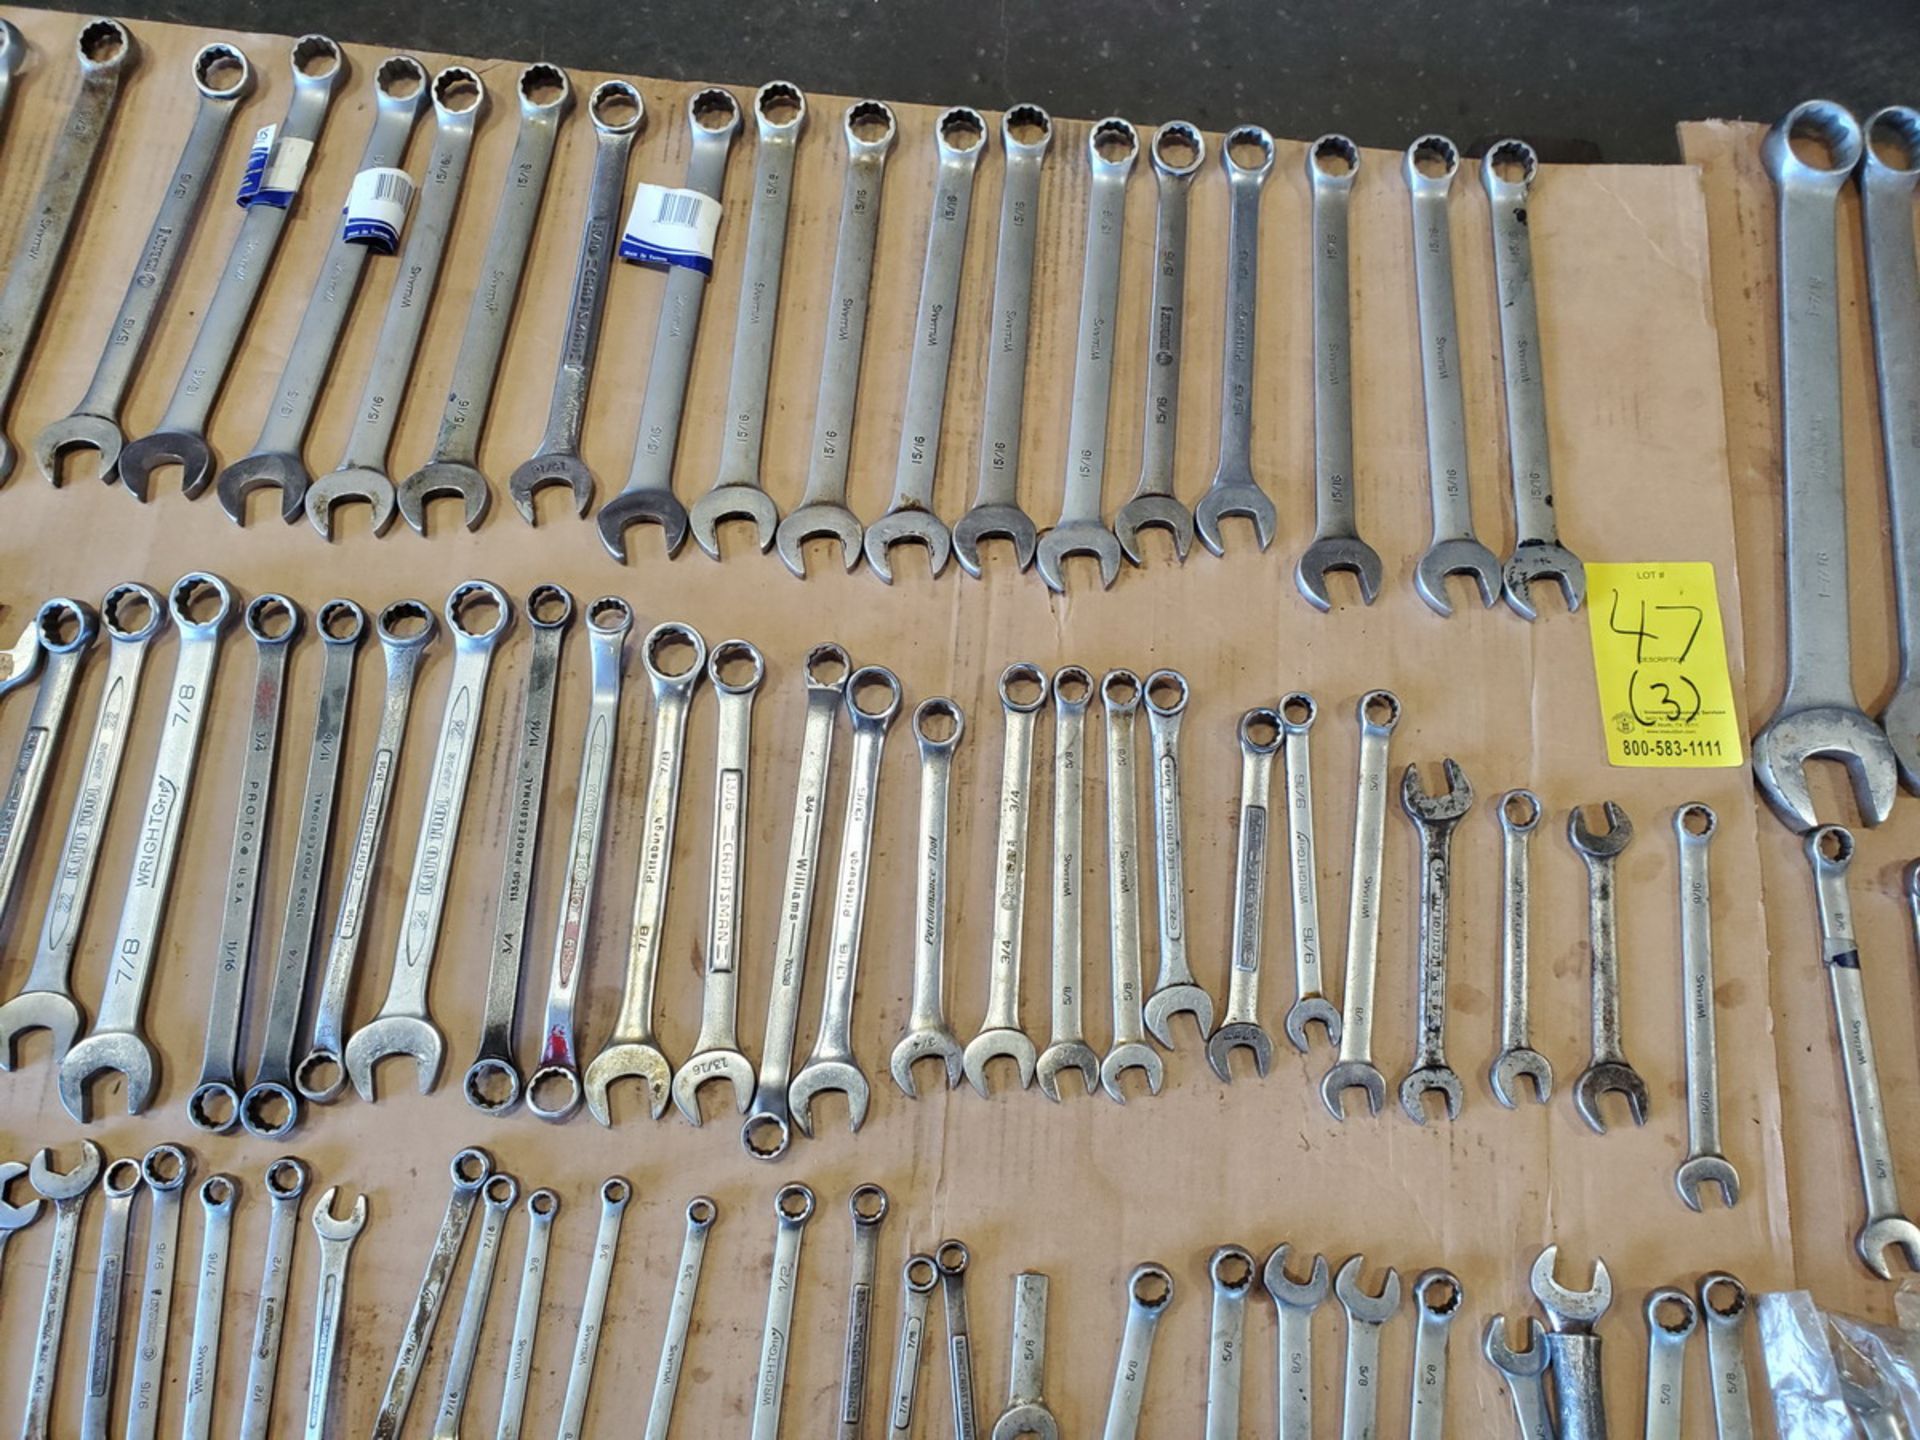 Assorted Material To Include But Not Limited To: Assorted Wrenches, C-Clamps, Assorted Pliers, etc. - Image 5 of 11